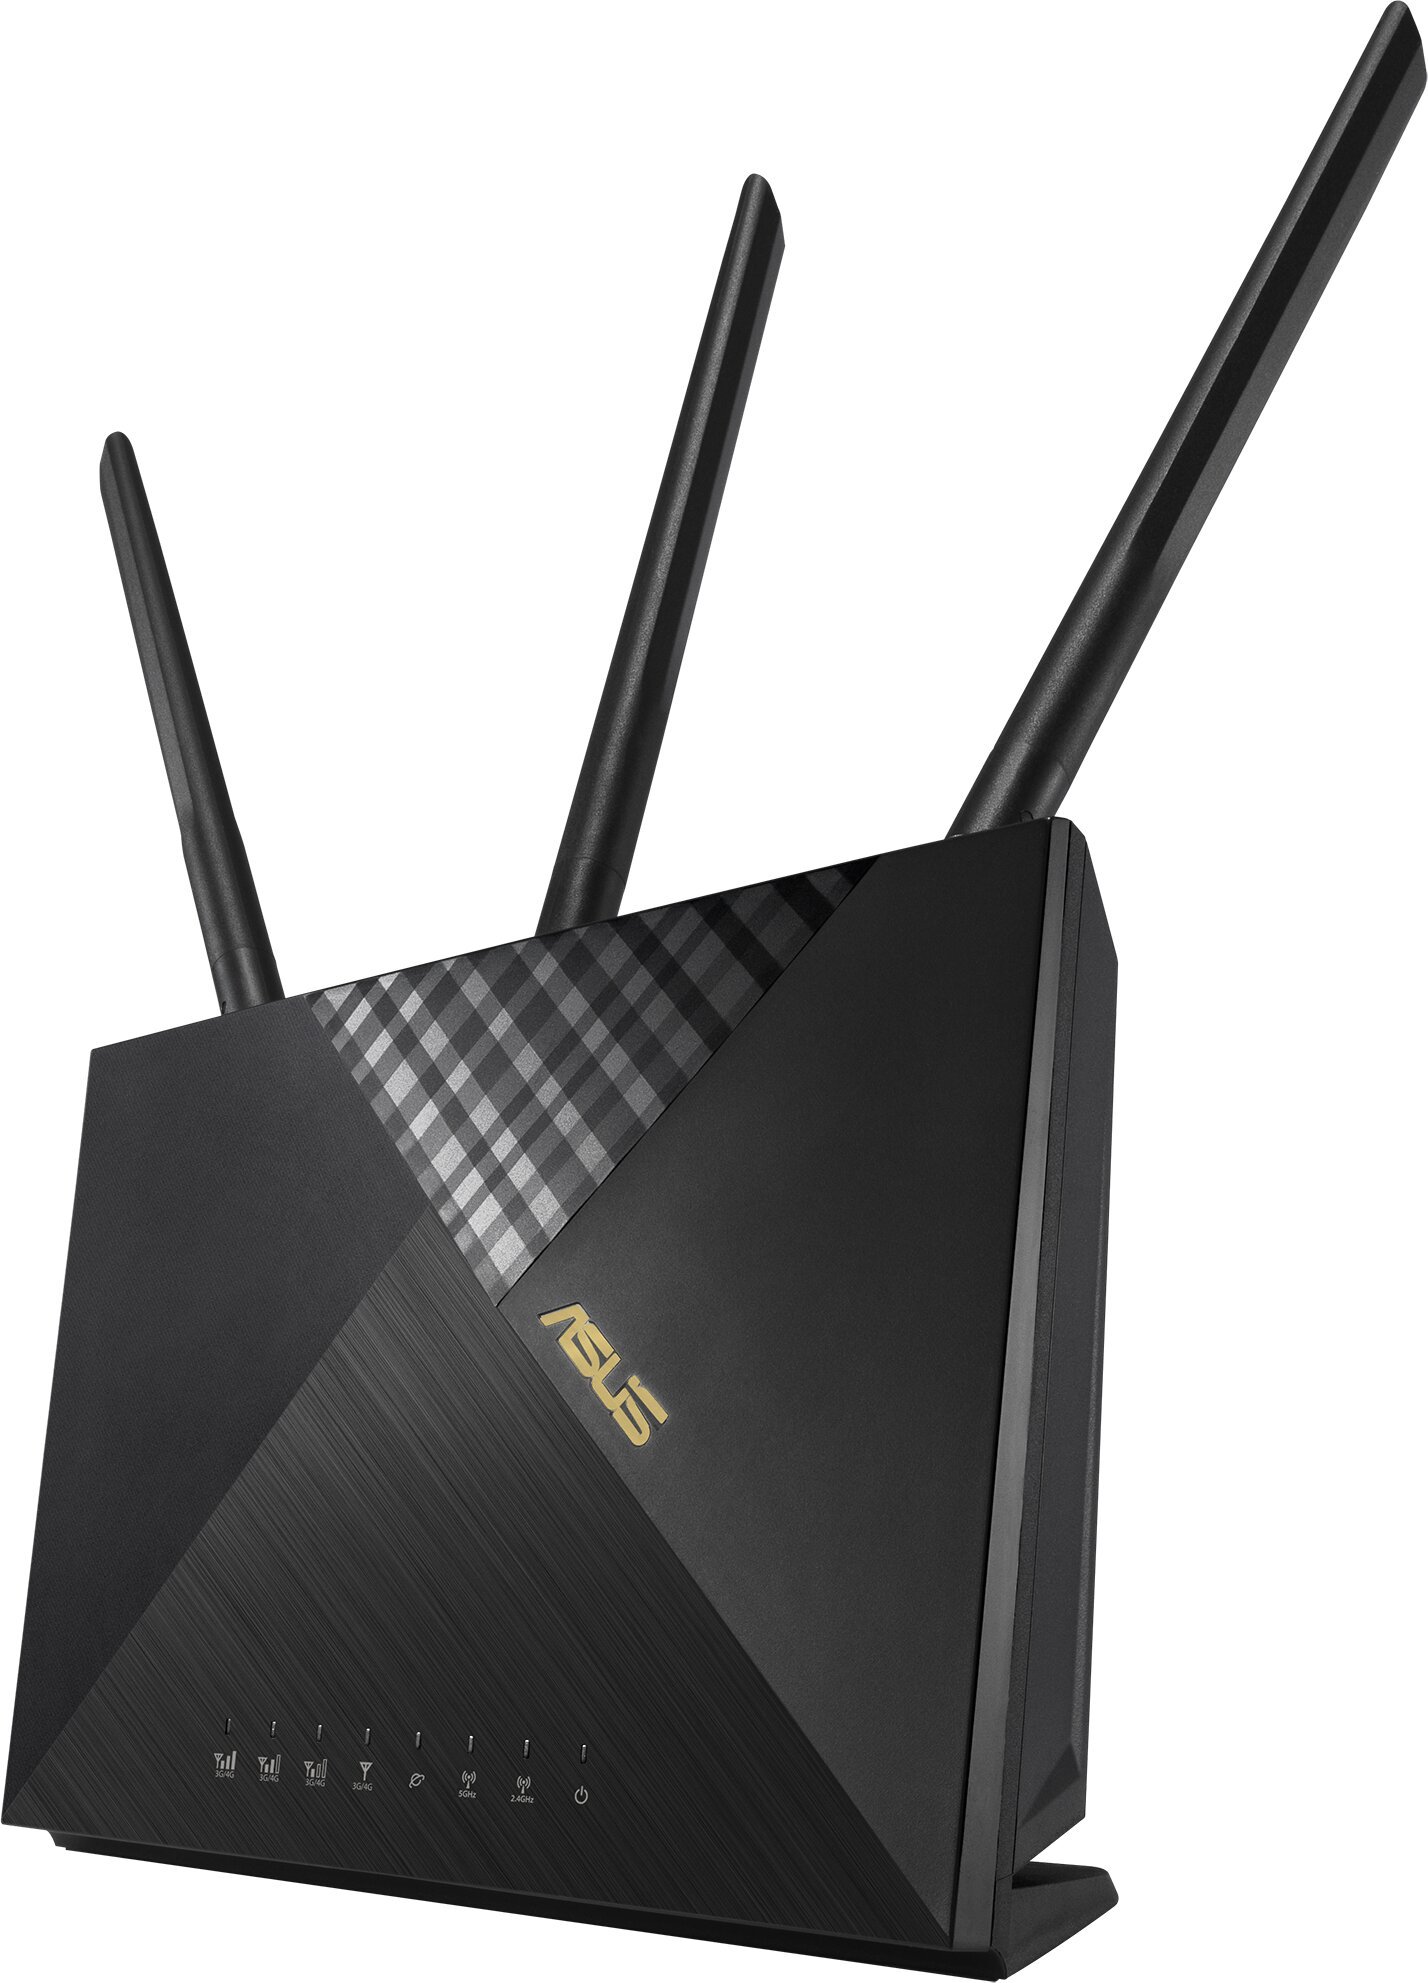 Obrázek ASUS 4G-AX56 - Dual-band LTE Router